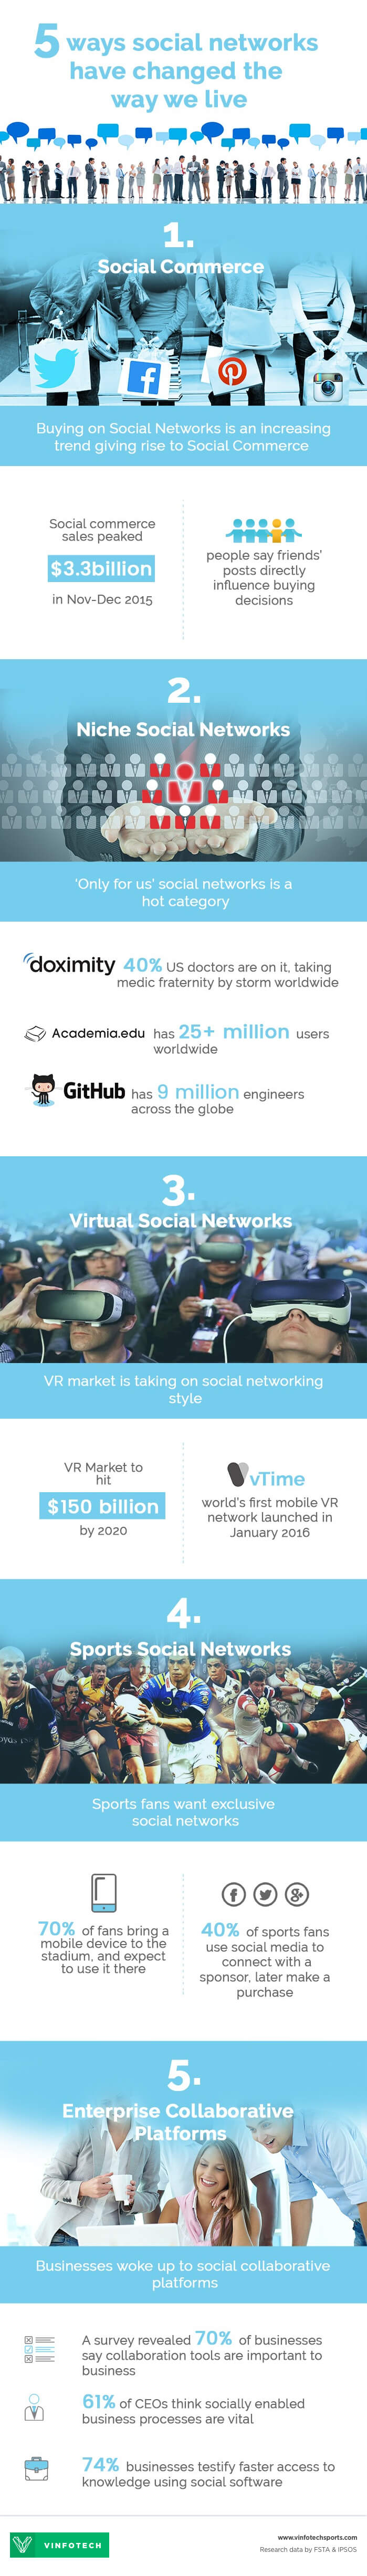 Social Networking Infographic Poster by Vinfotech